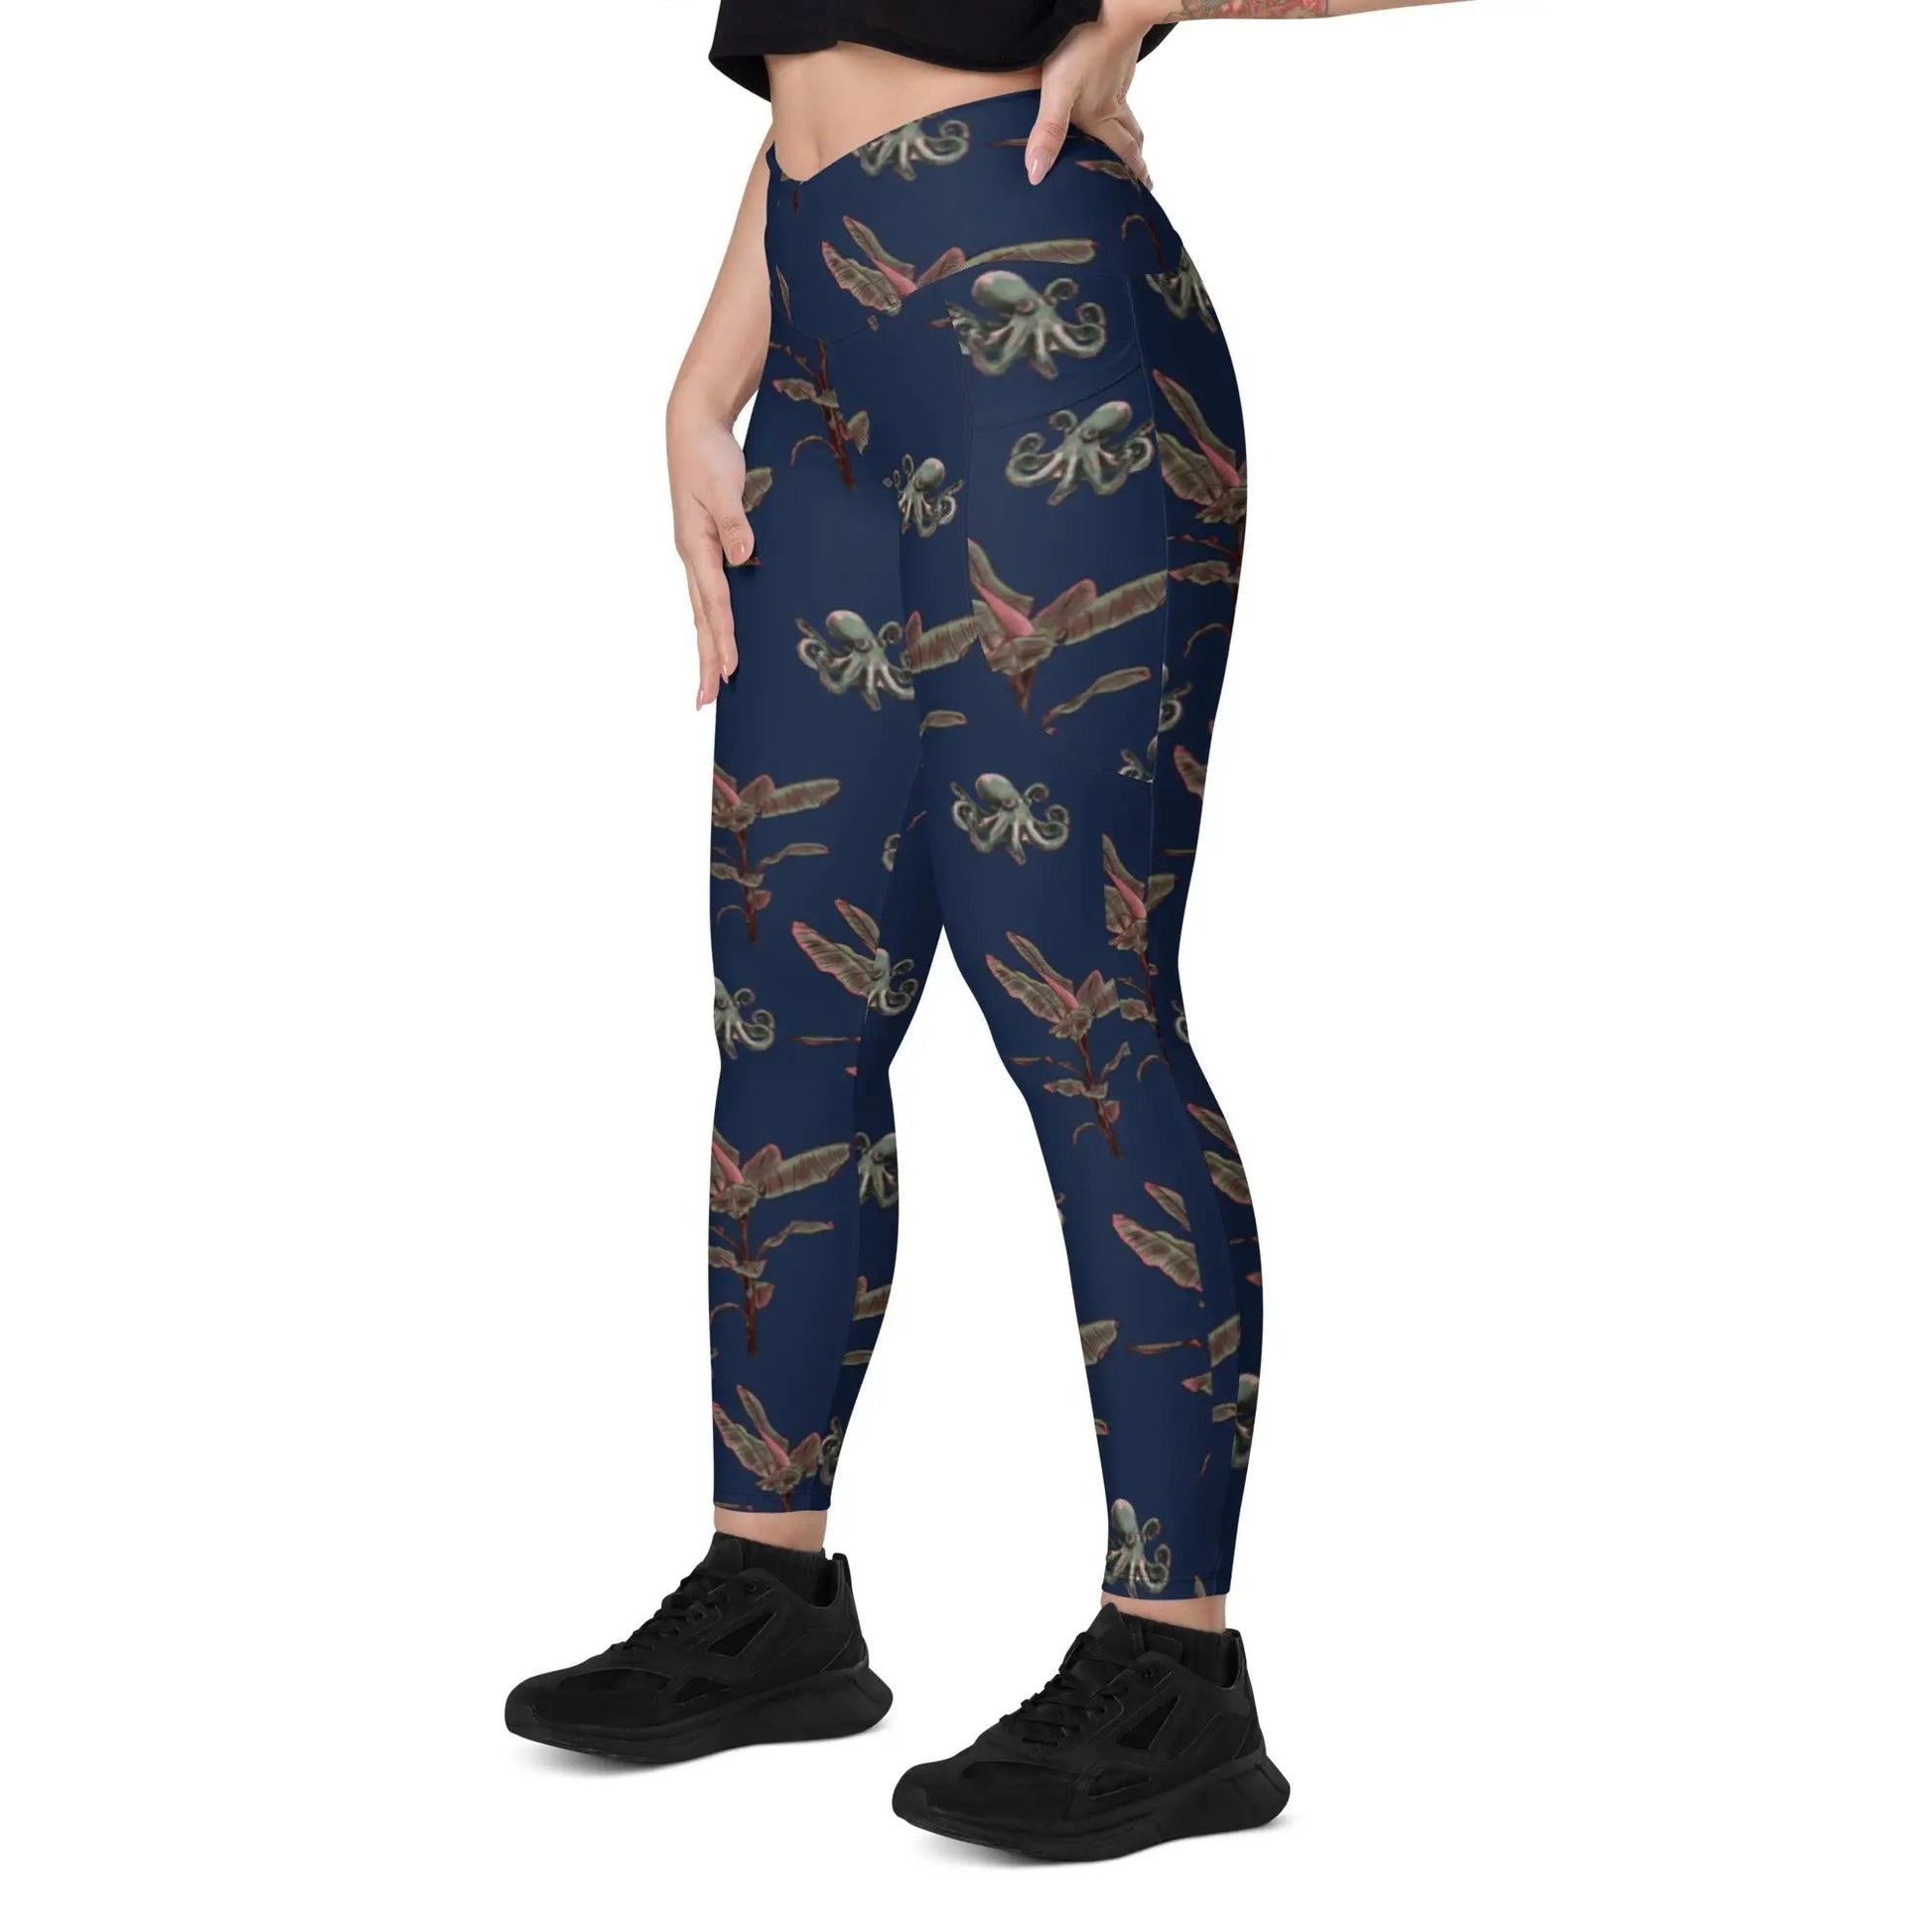 Vintage Octopus CROSSOVER leggings with pockets - Appalachian Bittersweet - Crossover Waist